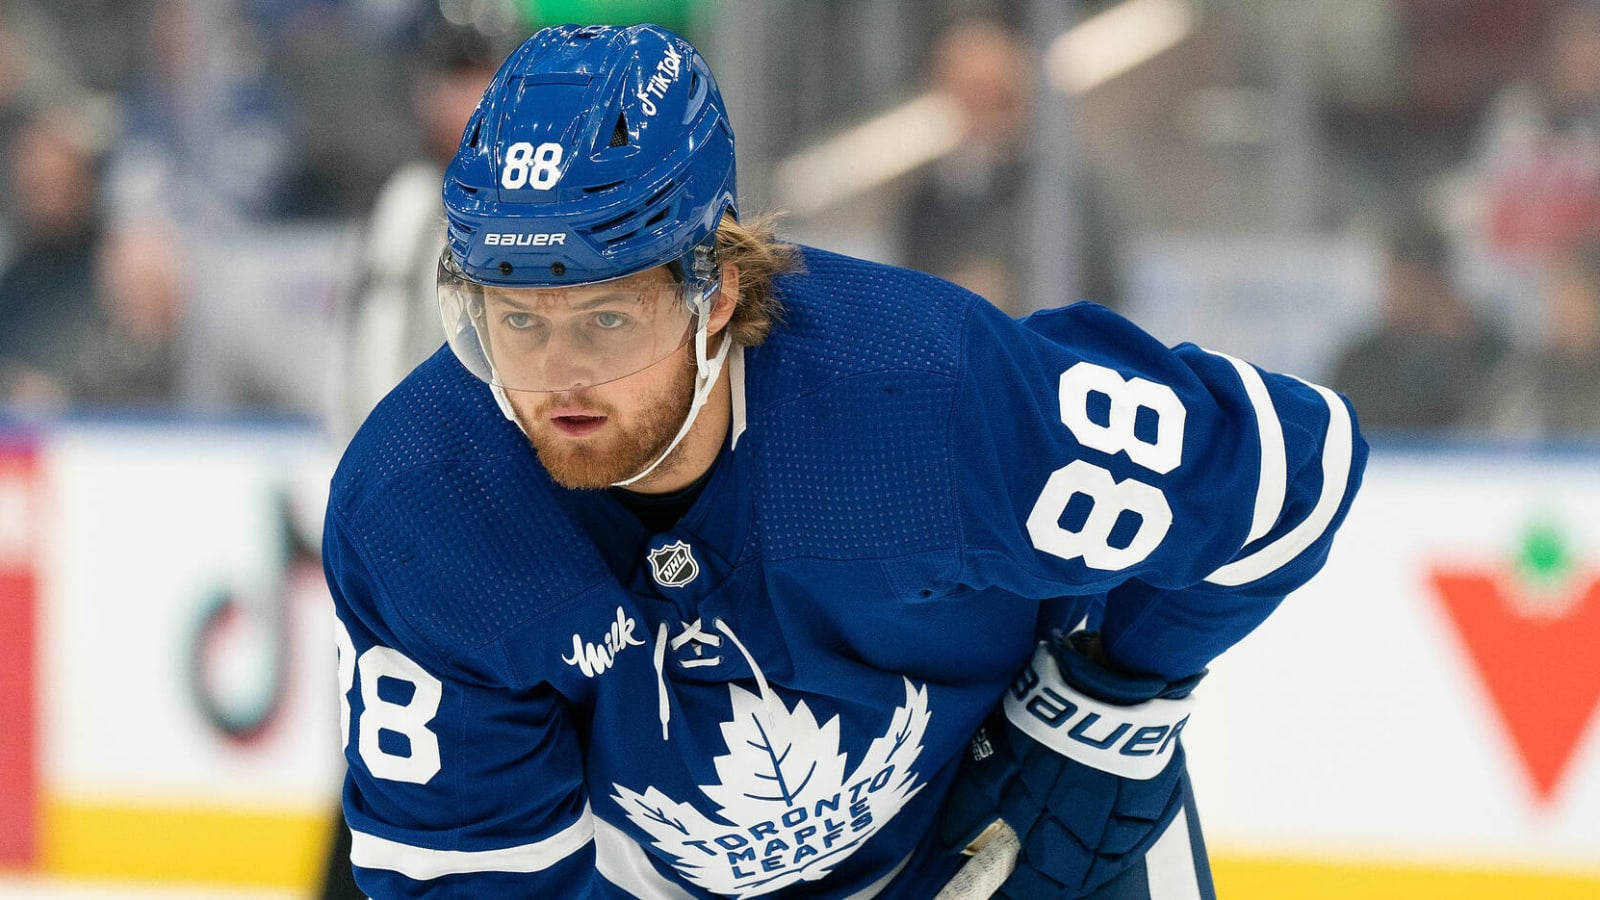 Professional Hockey Player William Nylander in Action Wallpaper